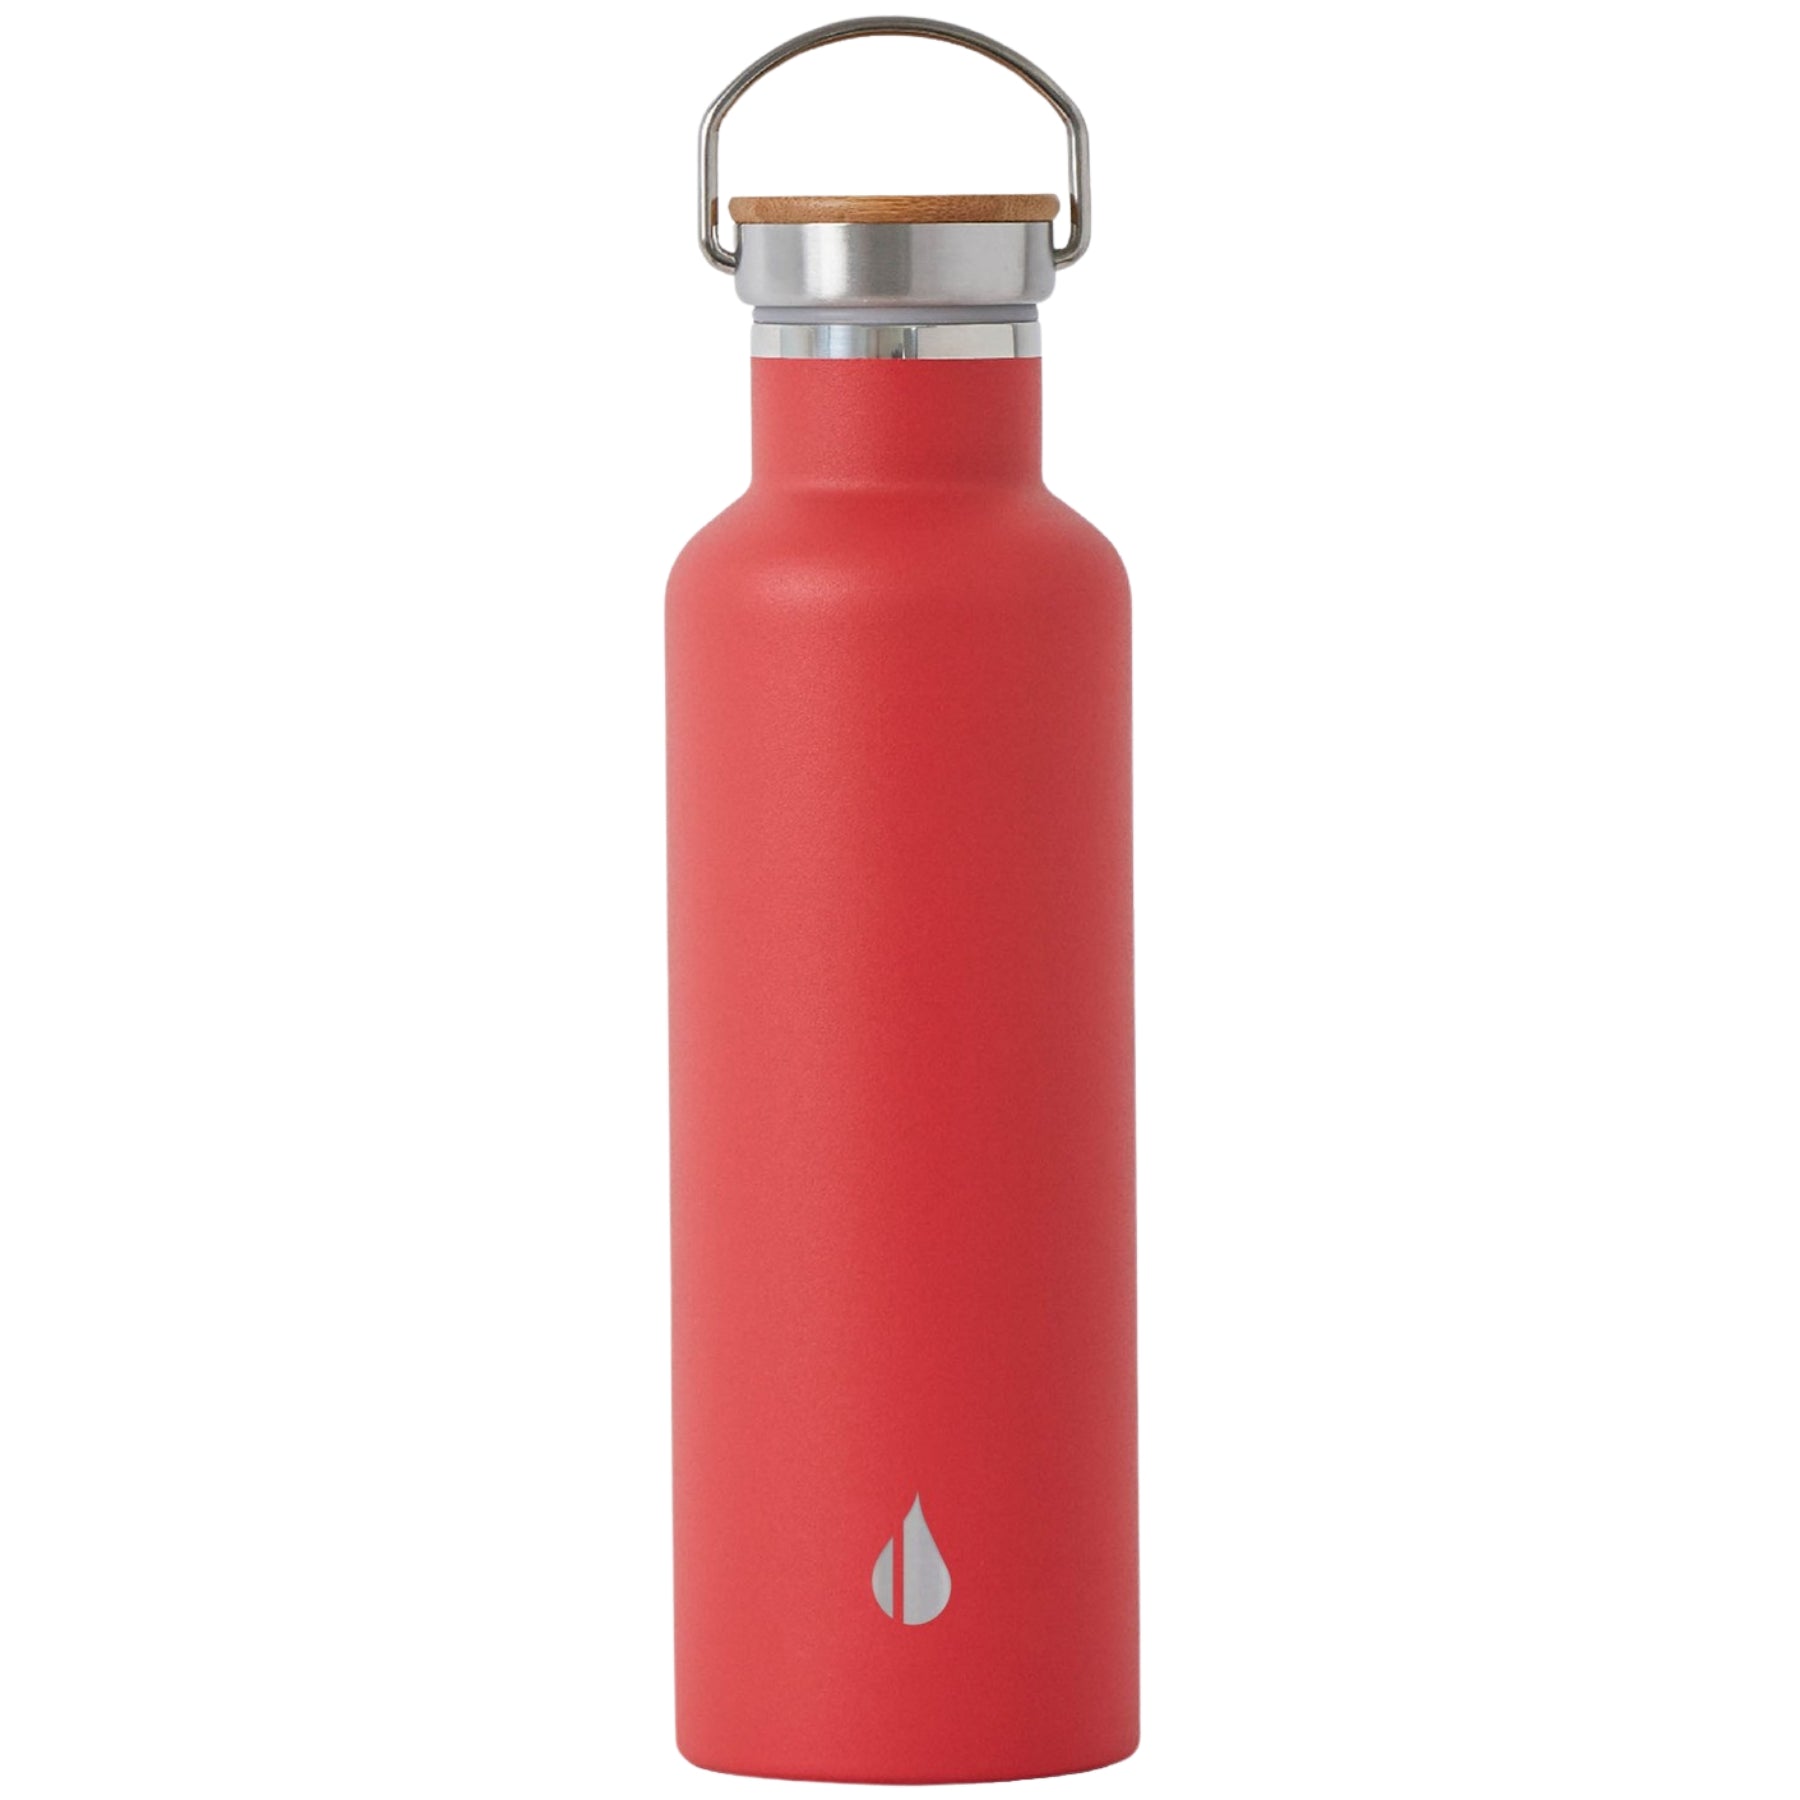 Customizable Elemental® 25 oz Stainless Steel Insulated Bottle in red